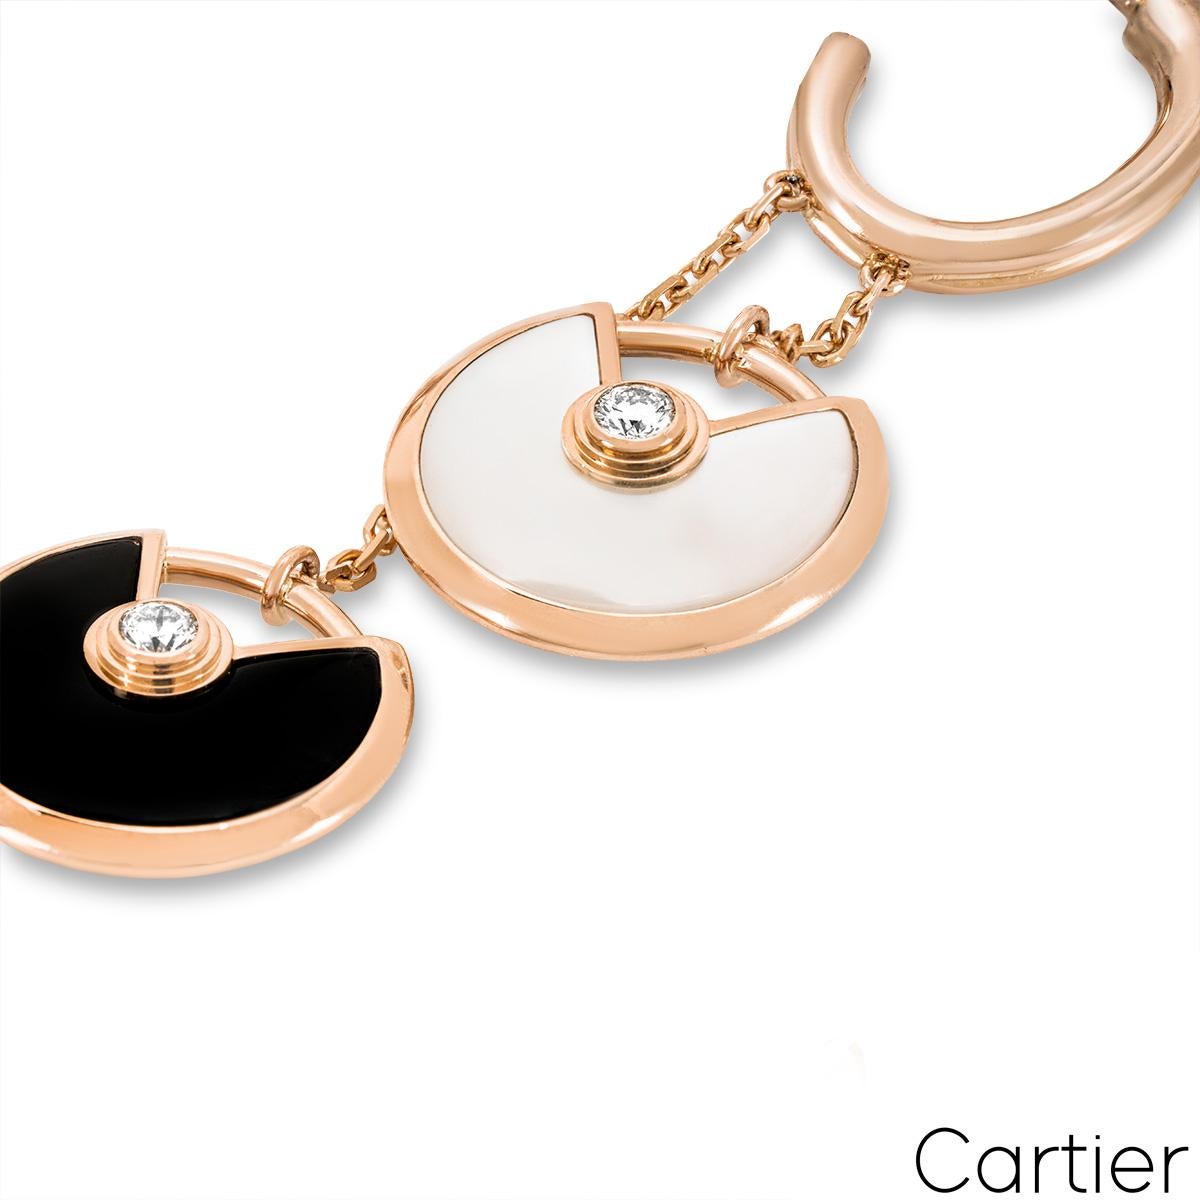 Cartier Rose Gold Amulette De Cartier XS Earrings B8301251 In Excellent Condition For Sale In London, GB